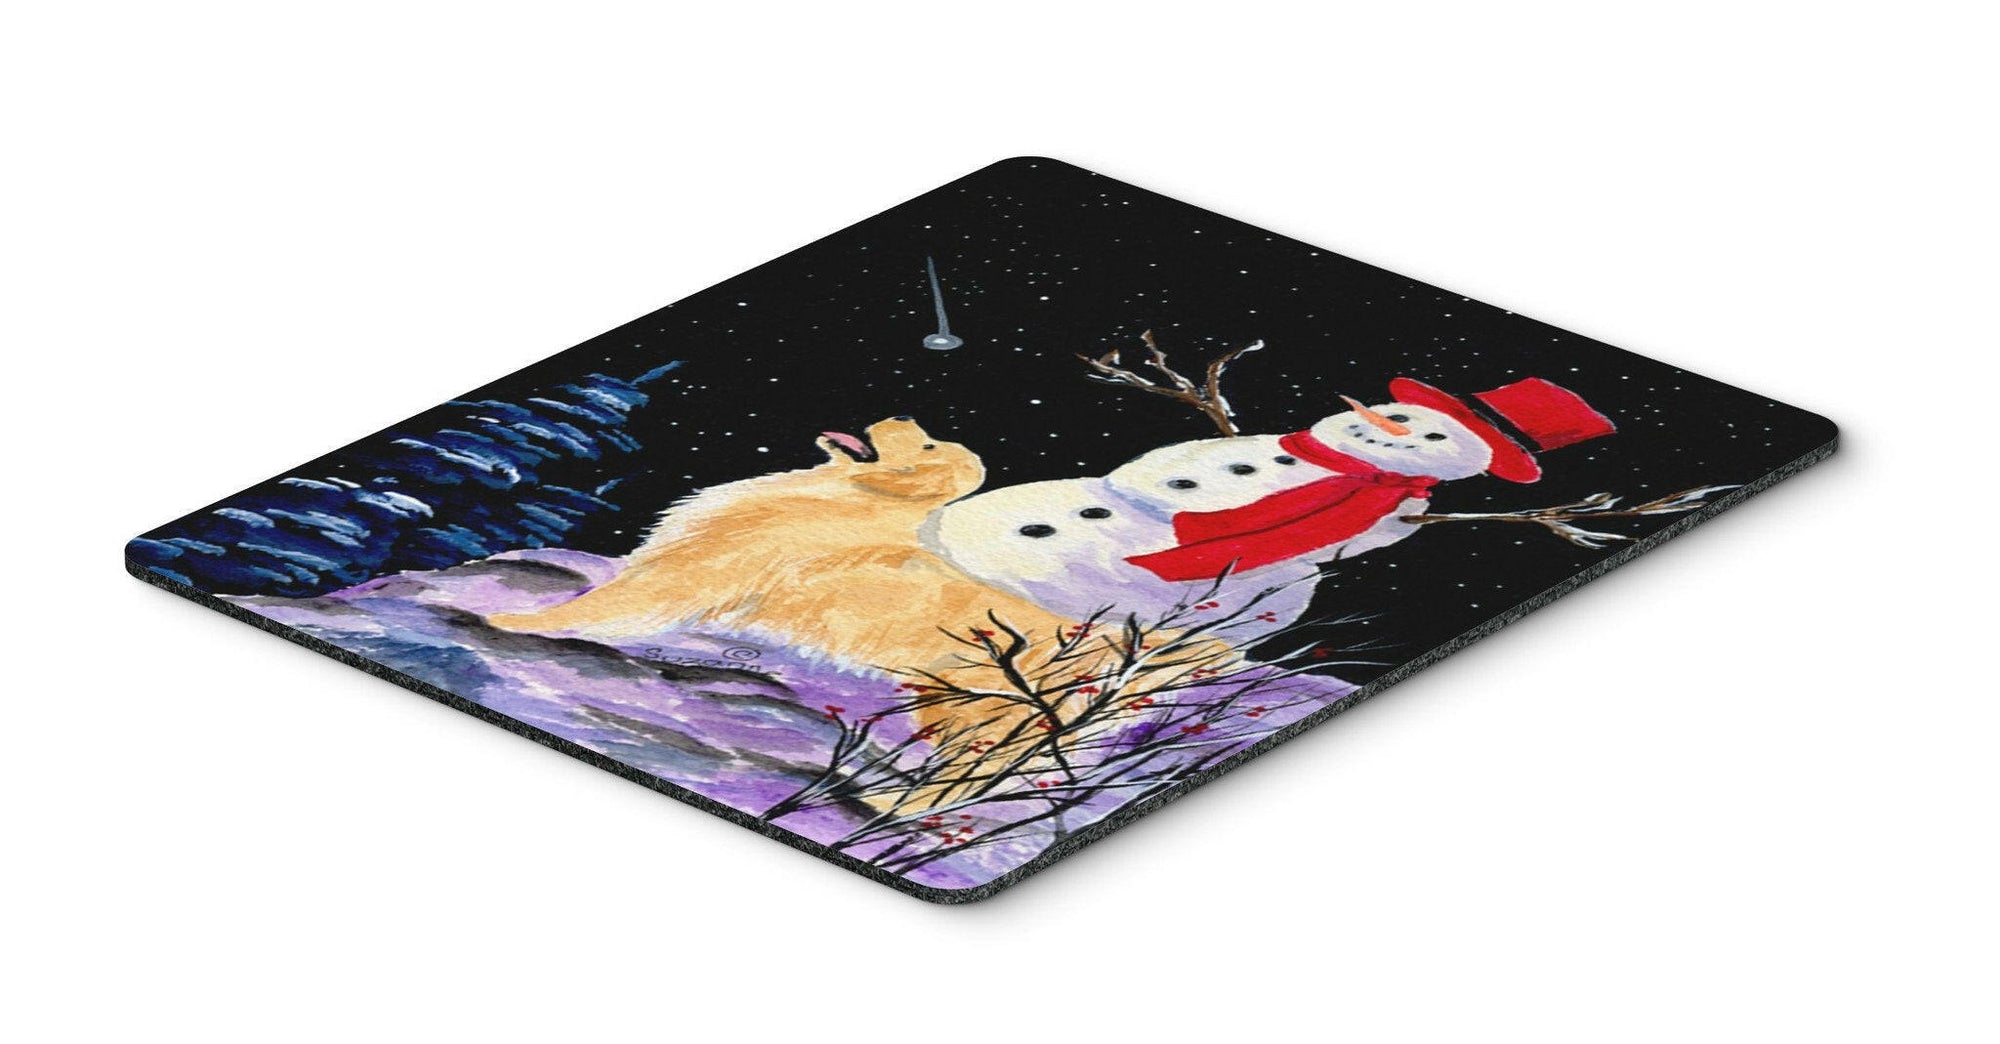 Golden Retriever with Snowman in red Hat Mouse Pad / Hot Pad / Trivet by Caroline's Treasures